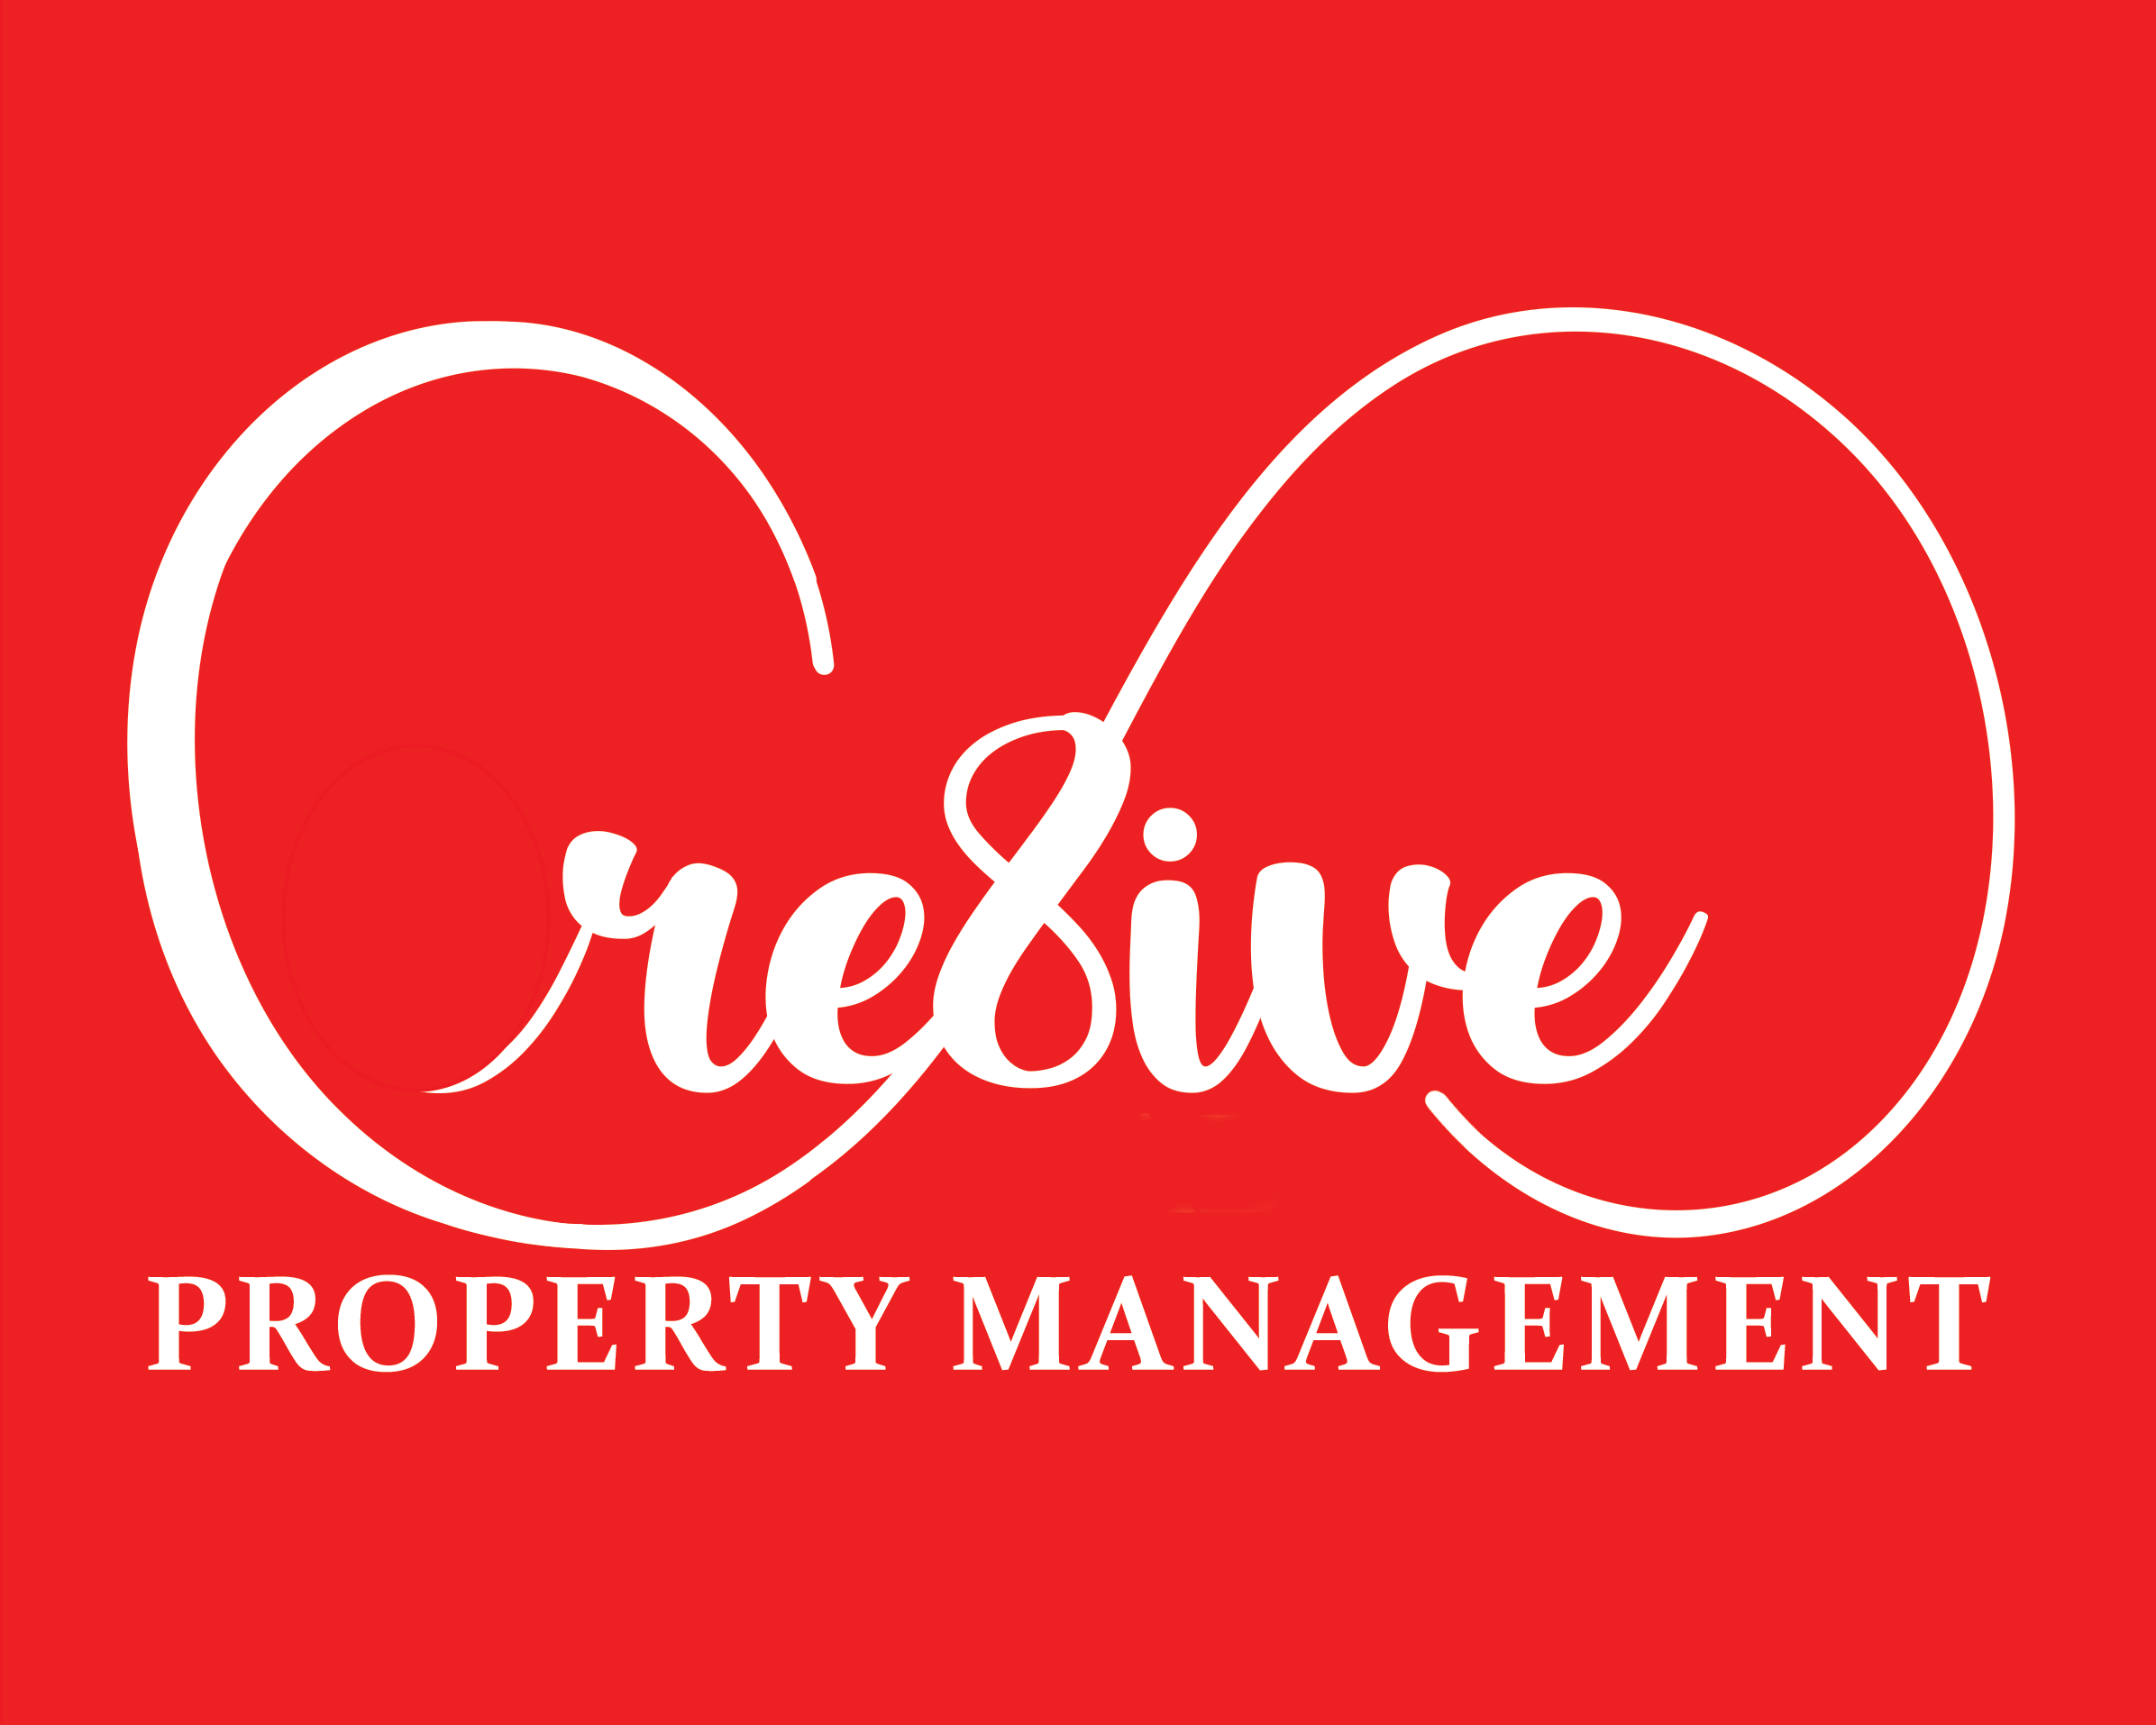 Cre8ive Property Management